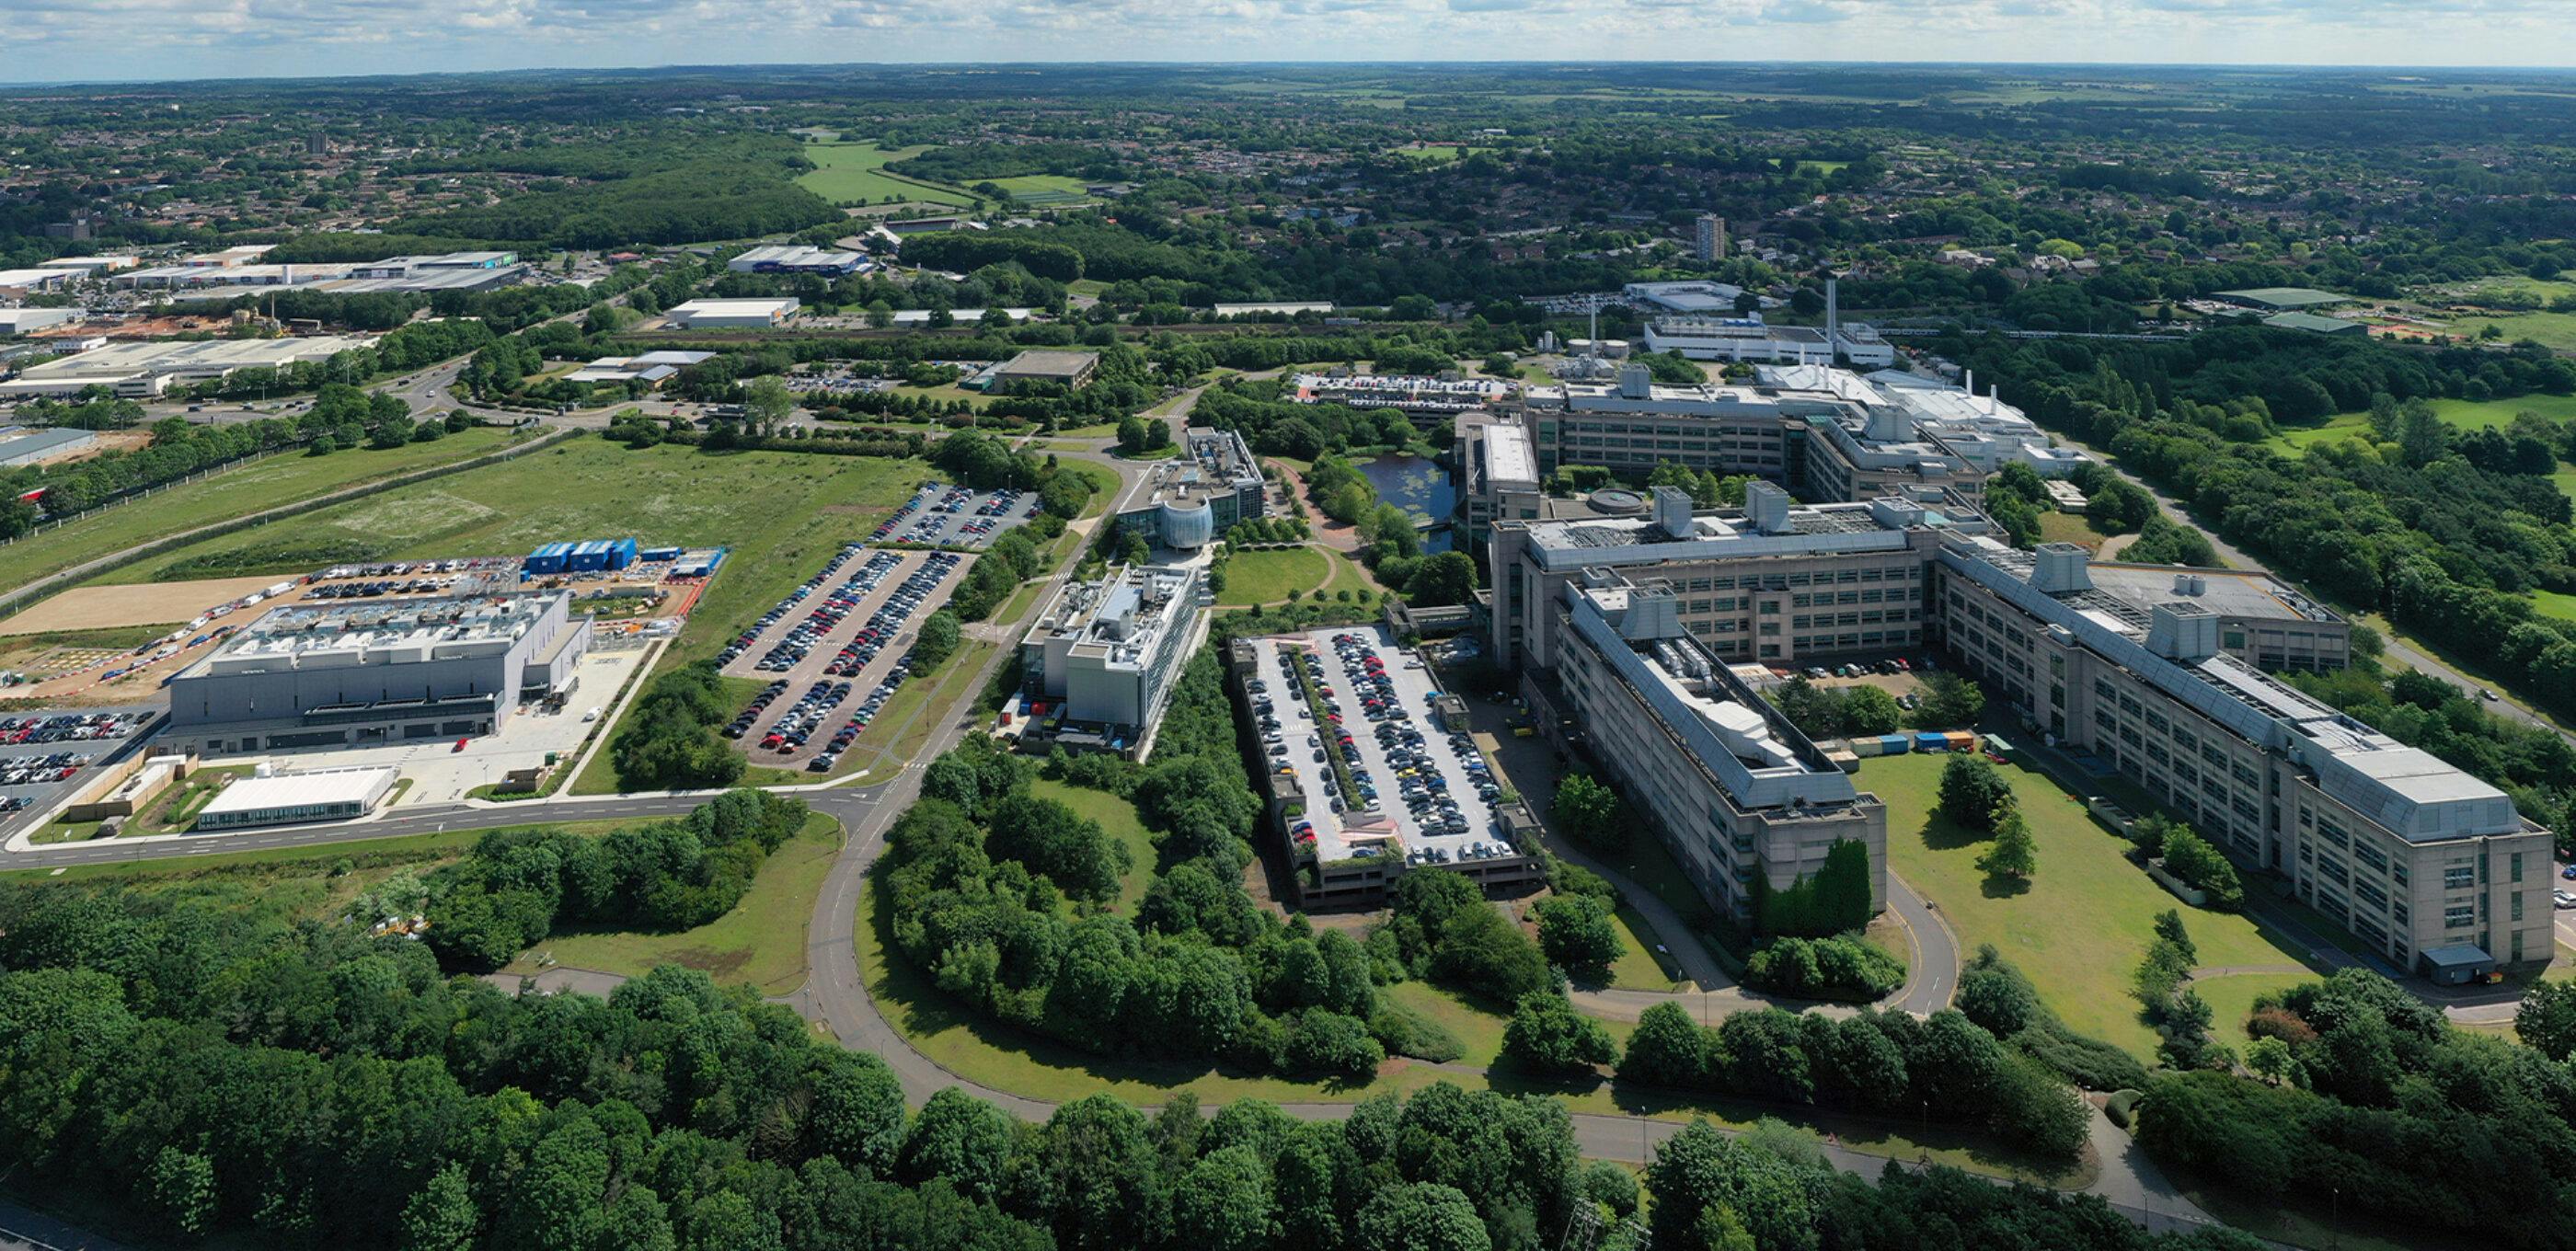 Press release: Cell and Gene Therapy Catapult to play significant role in establishing one of the largest life sciences campuses in Europe